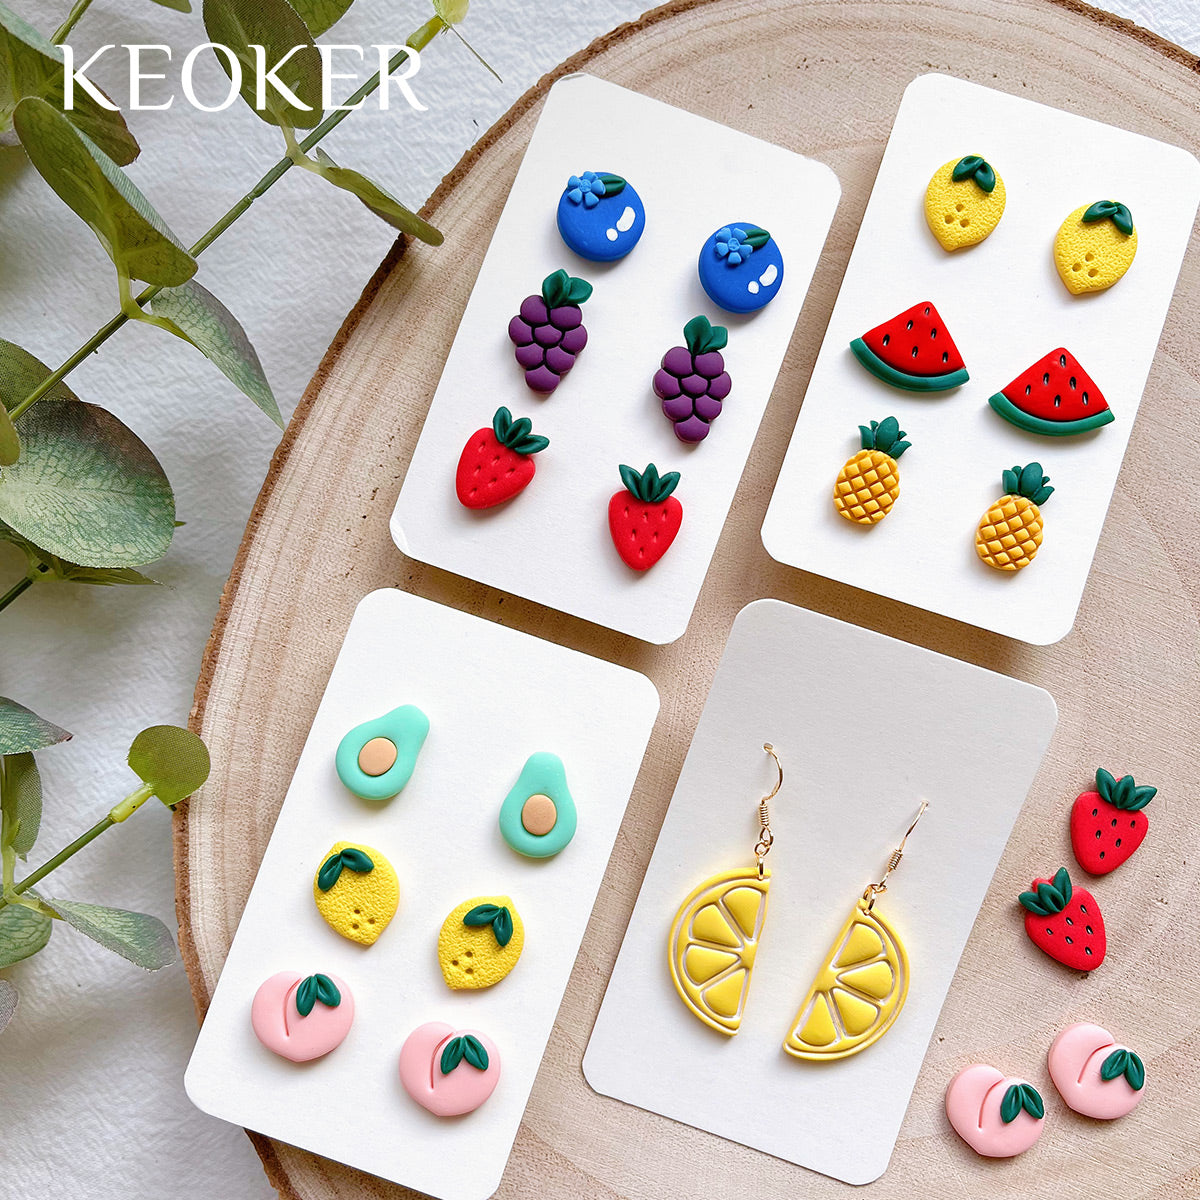 KEOKER Valentines Day Polymer Clay Cutters (14 Shapes)